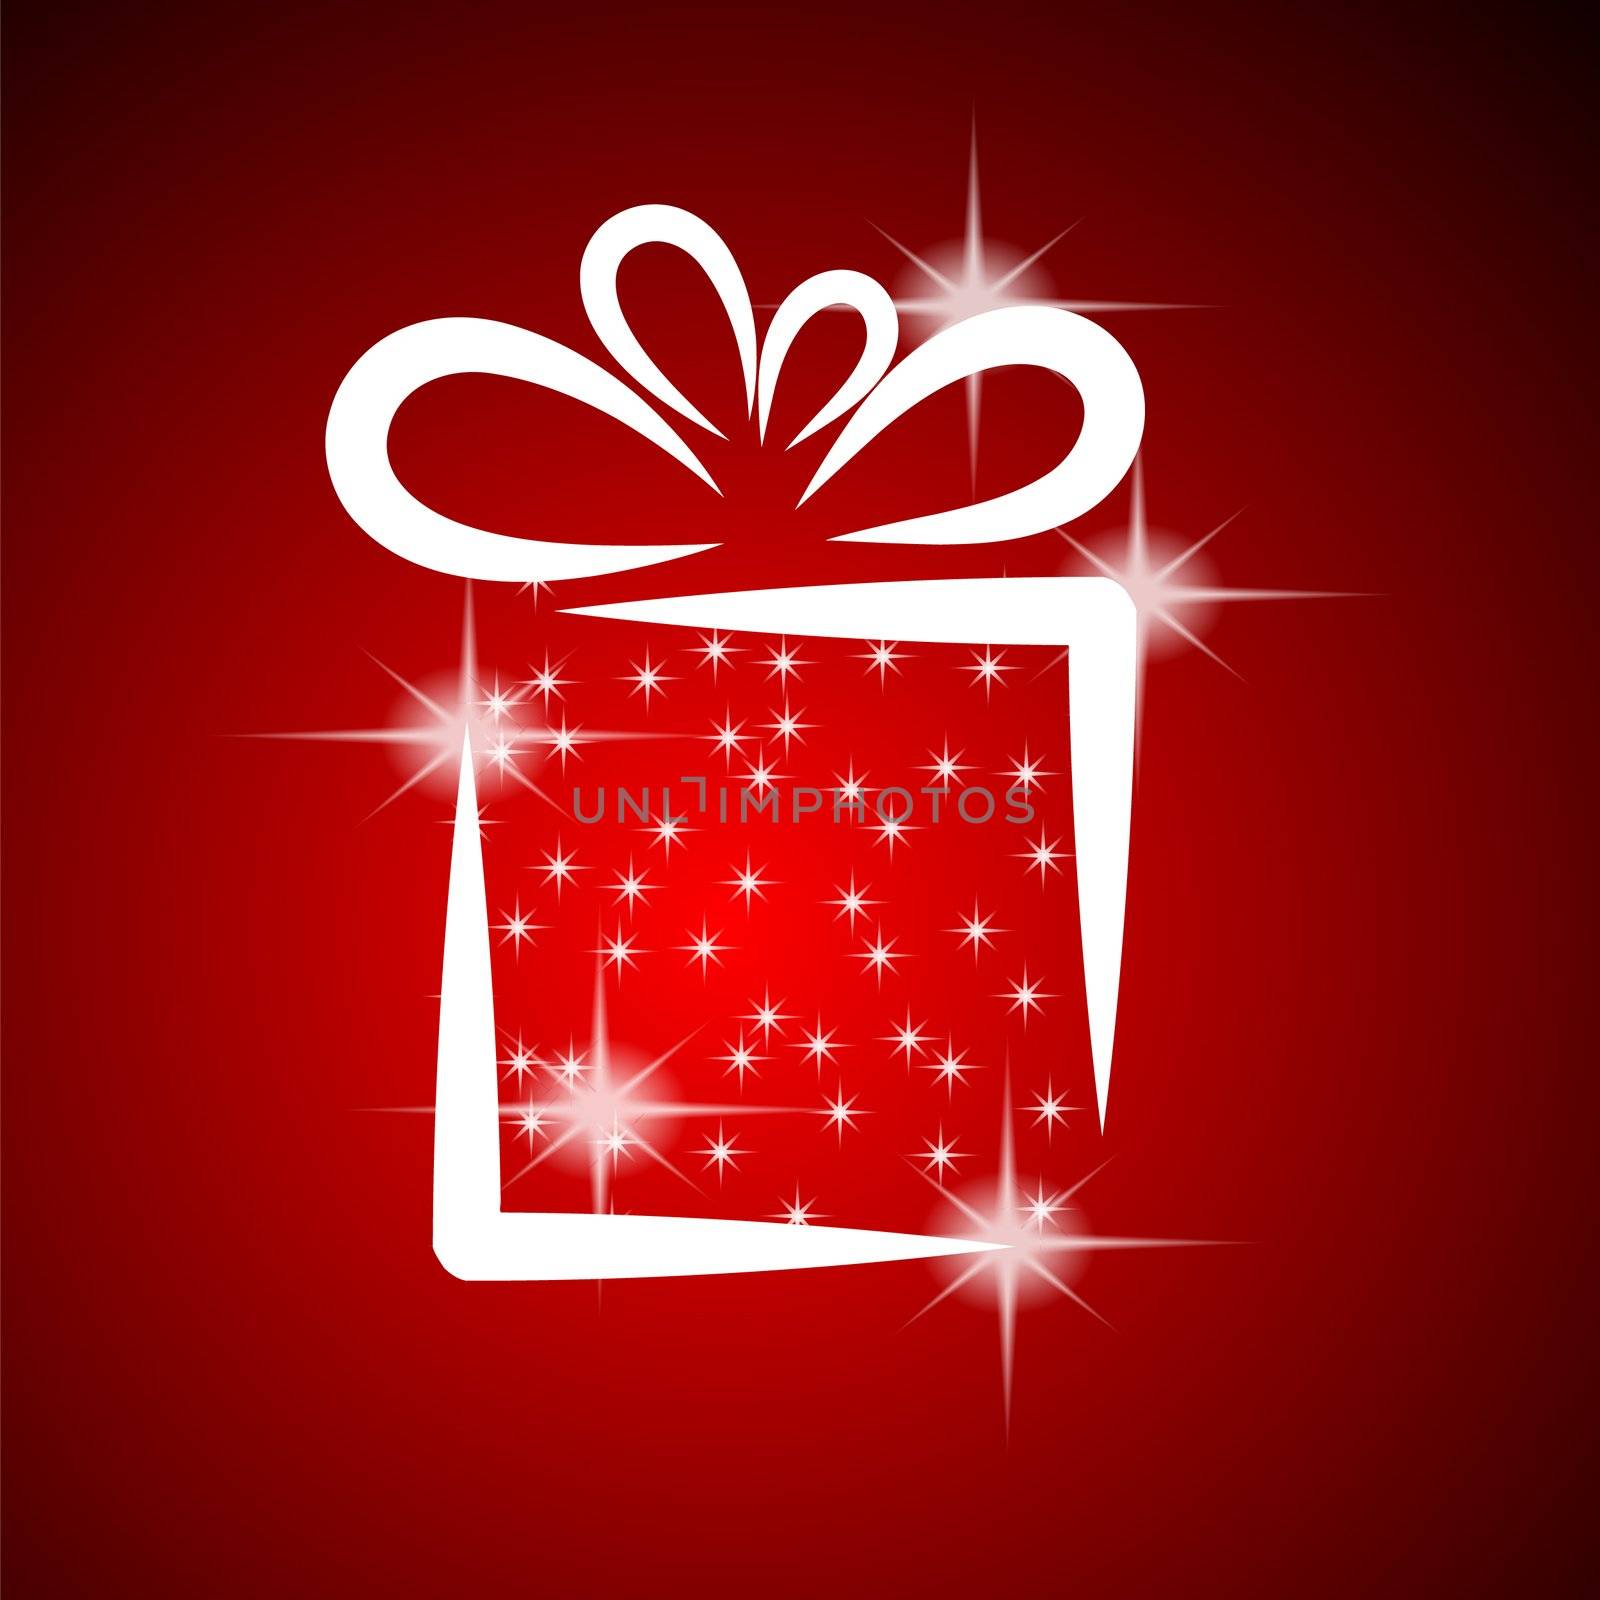 Christmas illustration with gift box on red background